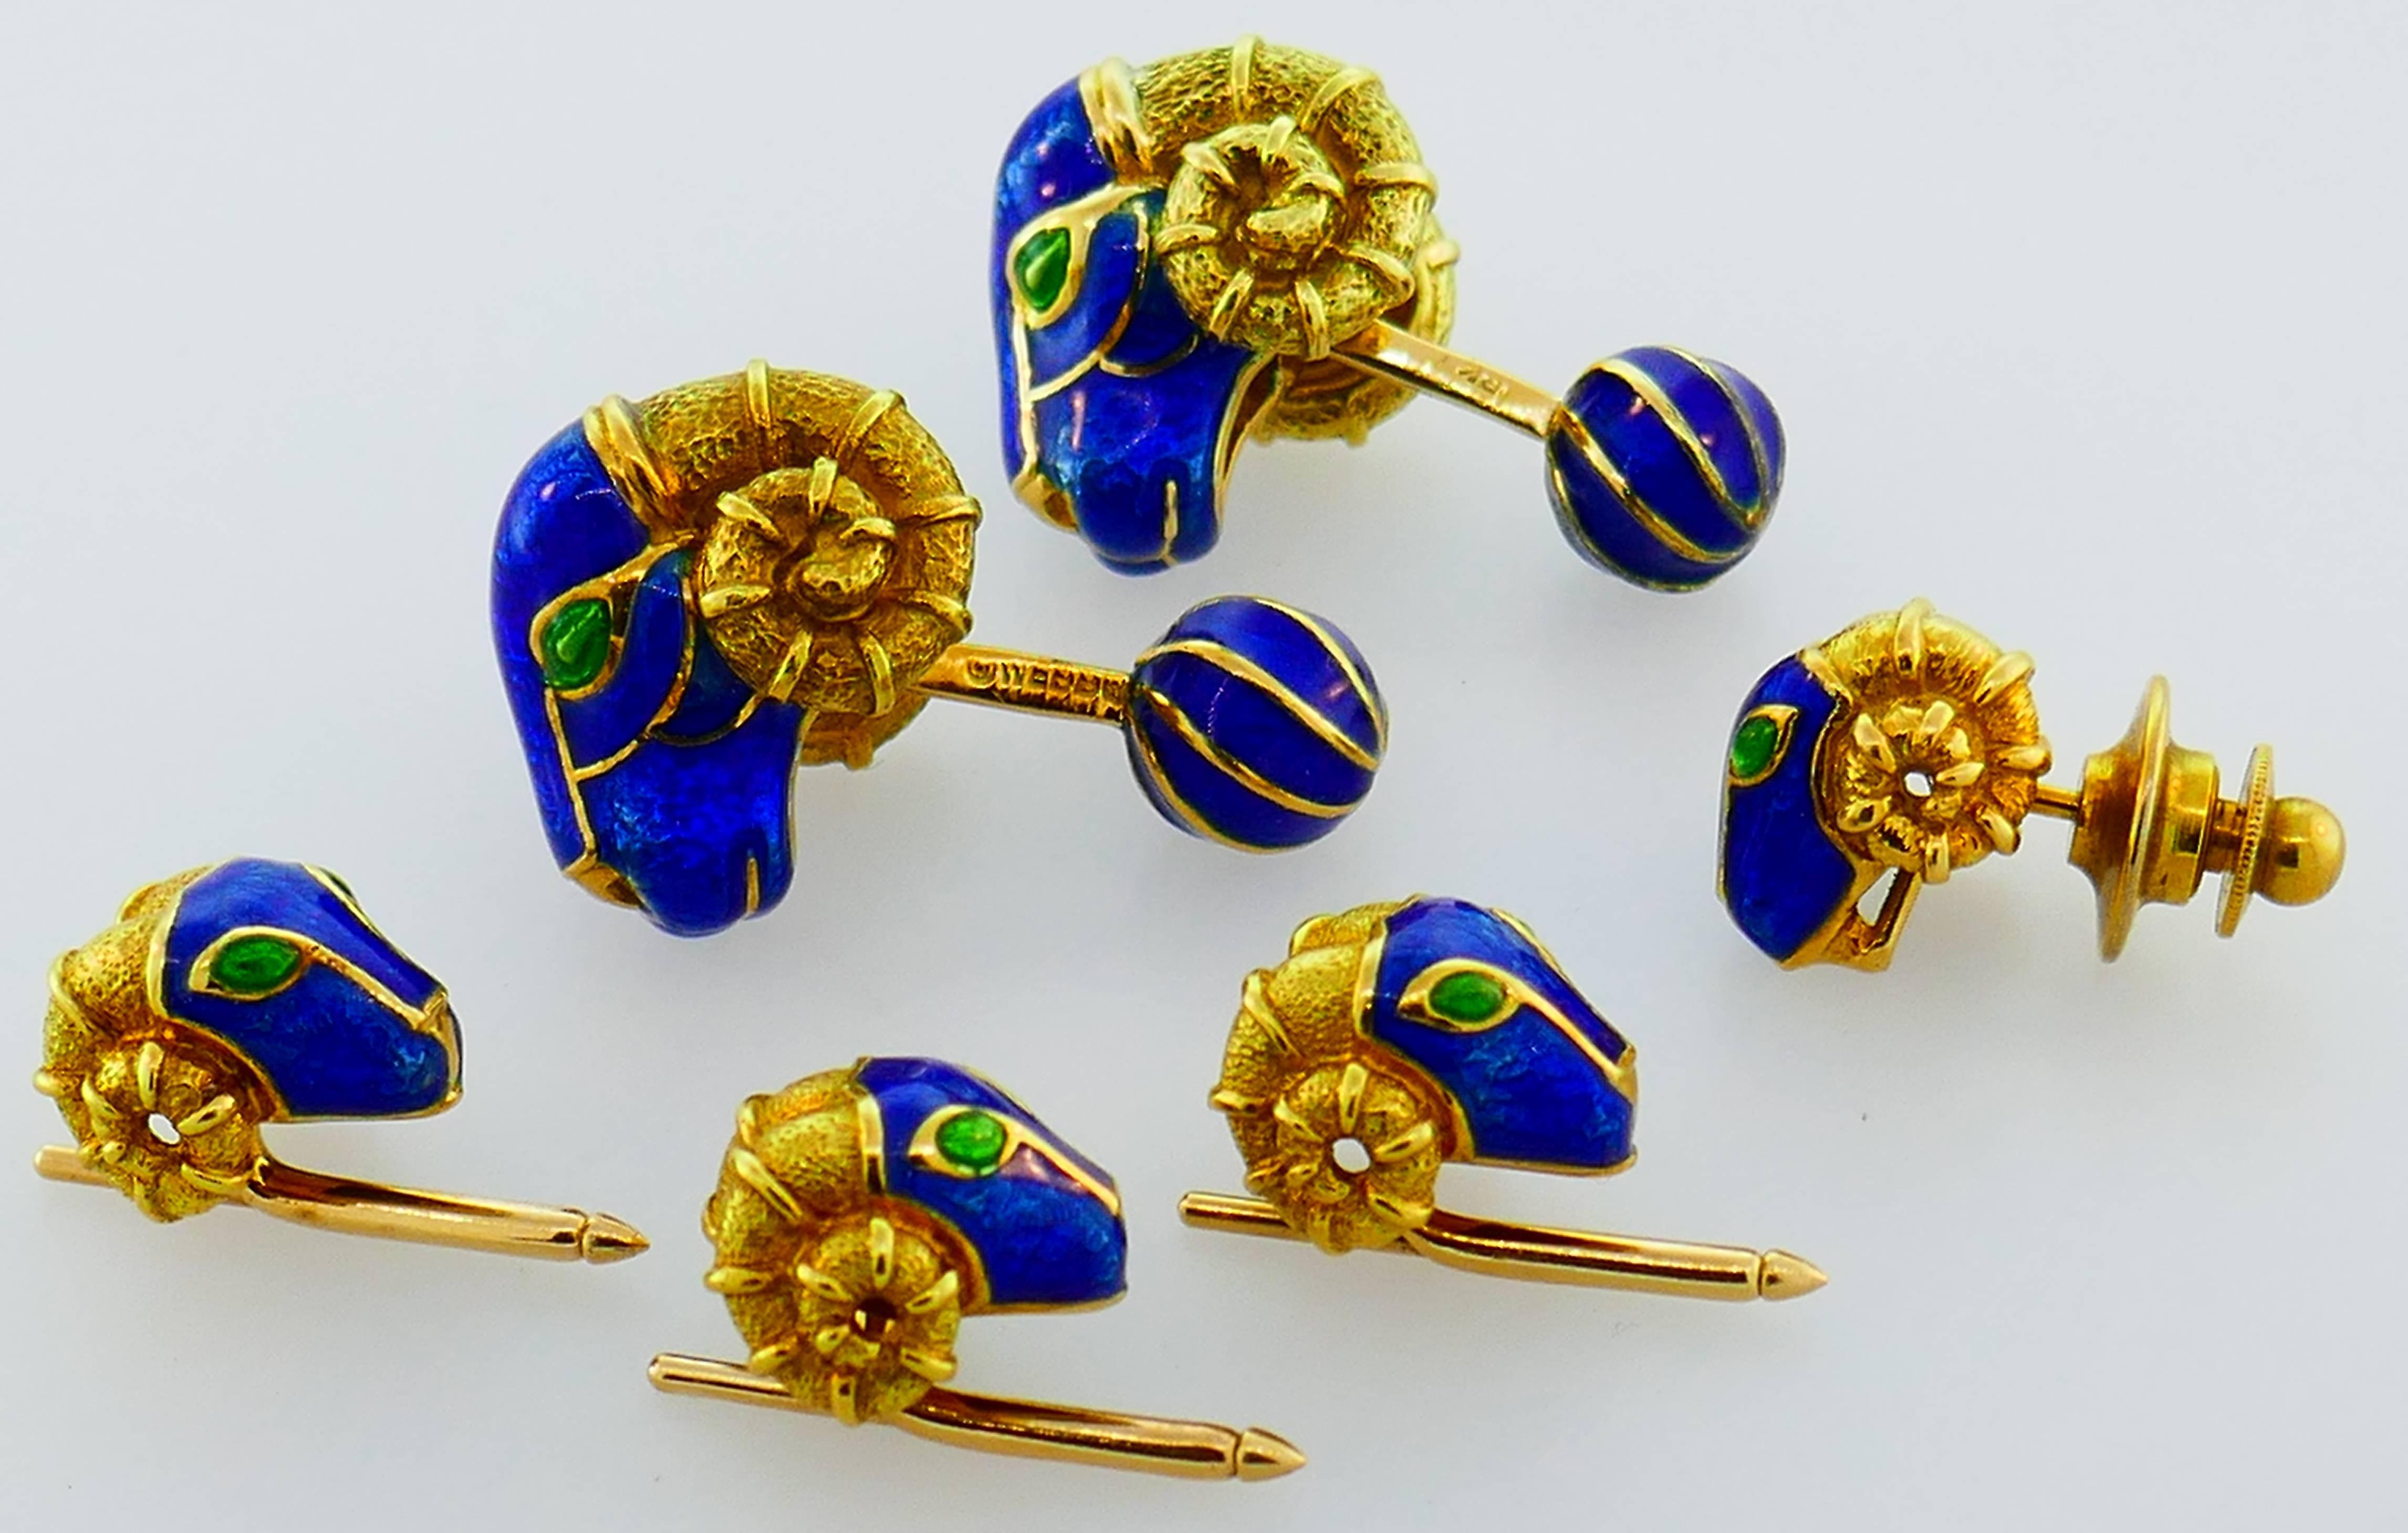 Colorful and fun cufflink & stud set created by David Webb in the 1980's. Elegant and stylish, the set is a great addition to your jewelry and accessories collection. 
Made of 18 karat (stamped) yellow gold and enamel. The bars on the studs are made